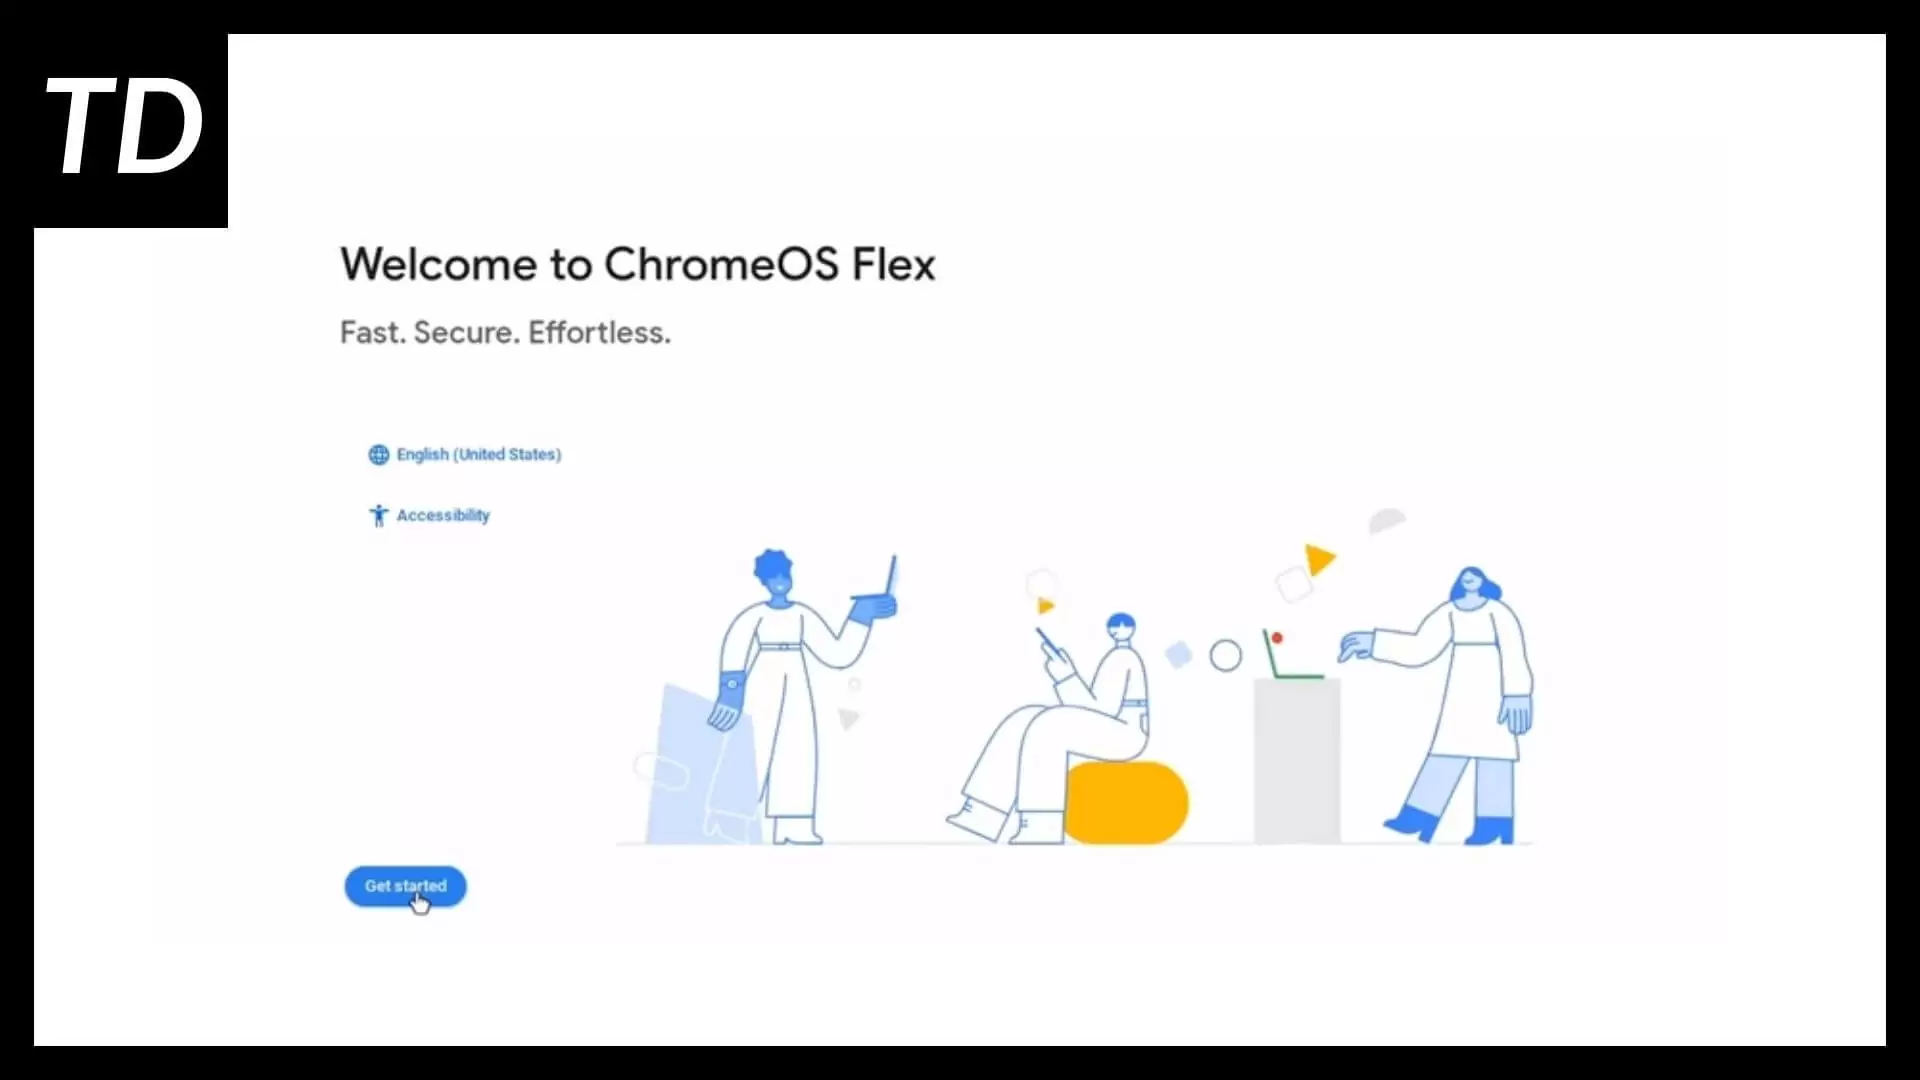 Welcome to Chrome OS screen on boot up